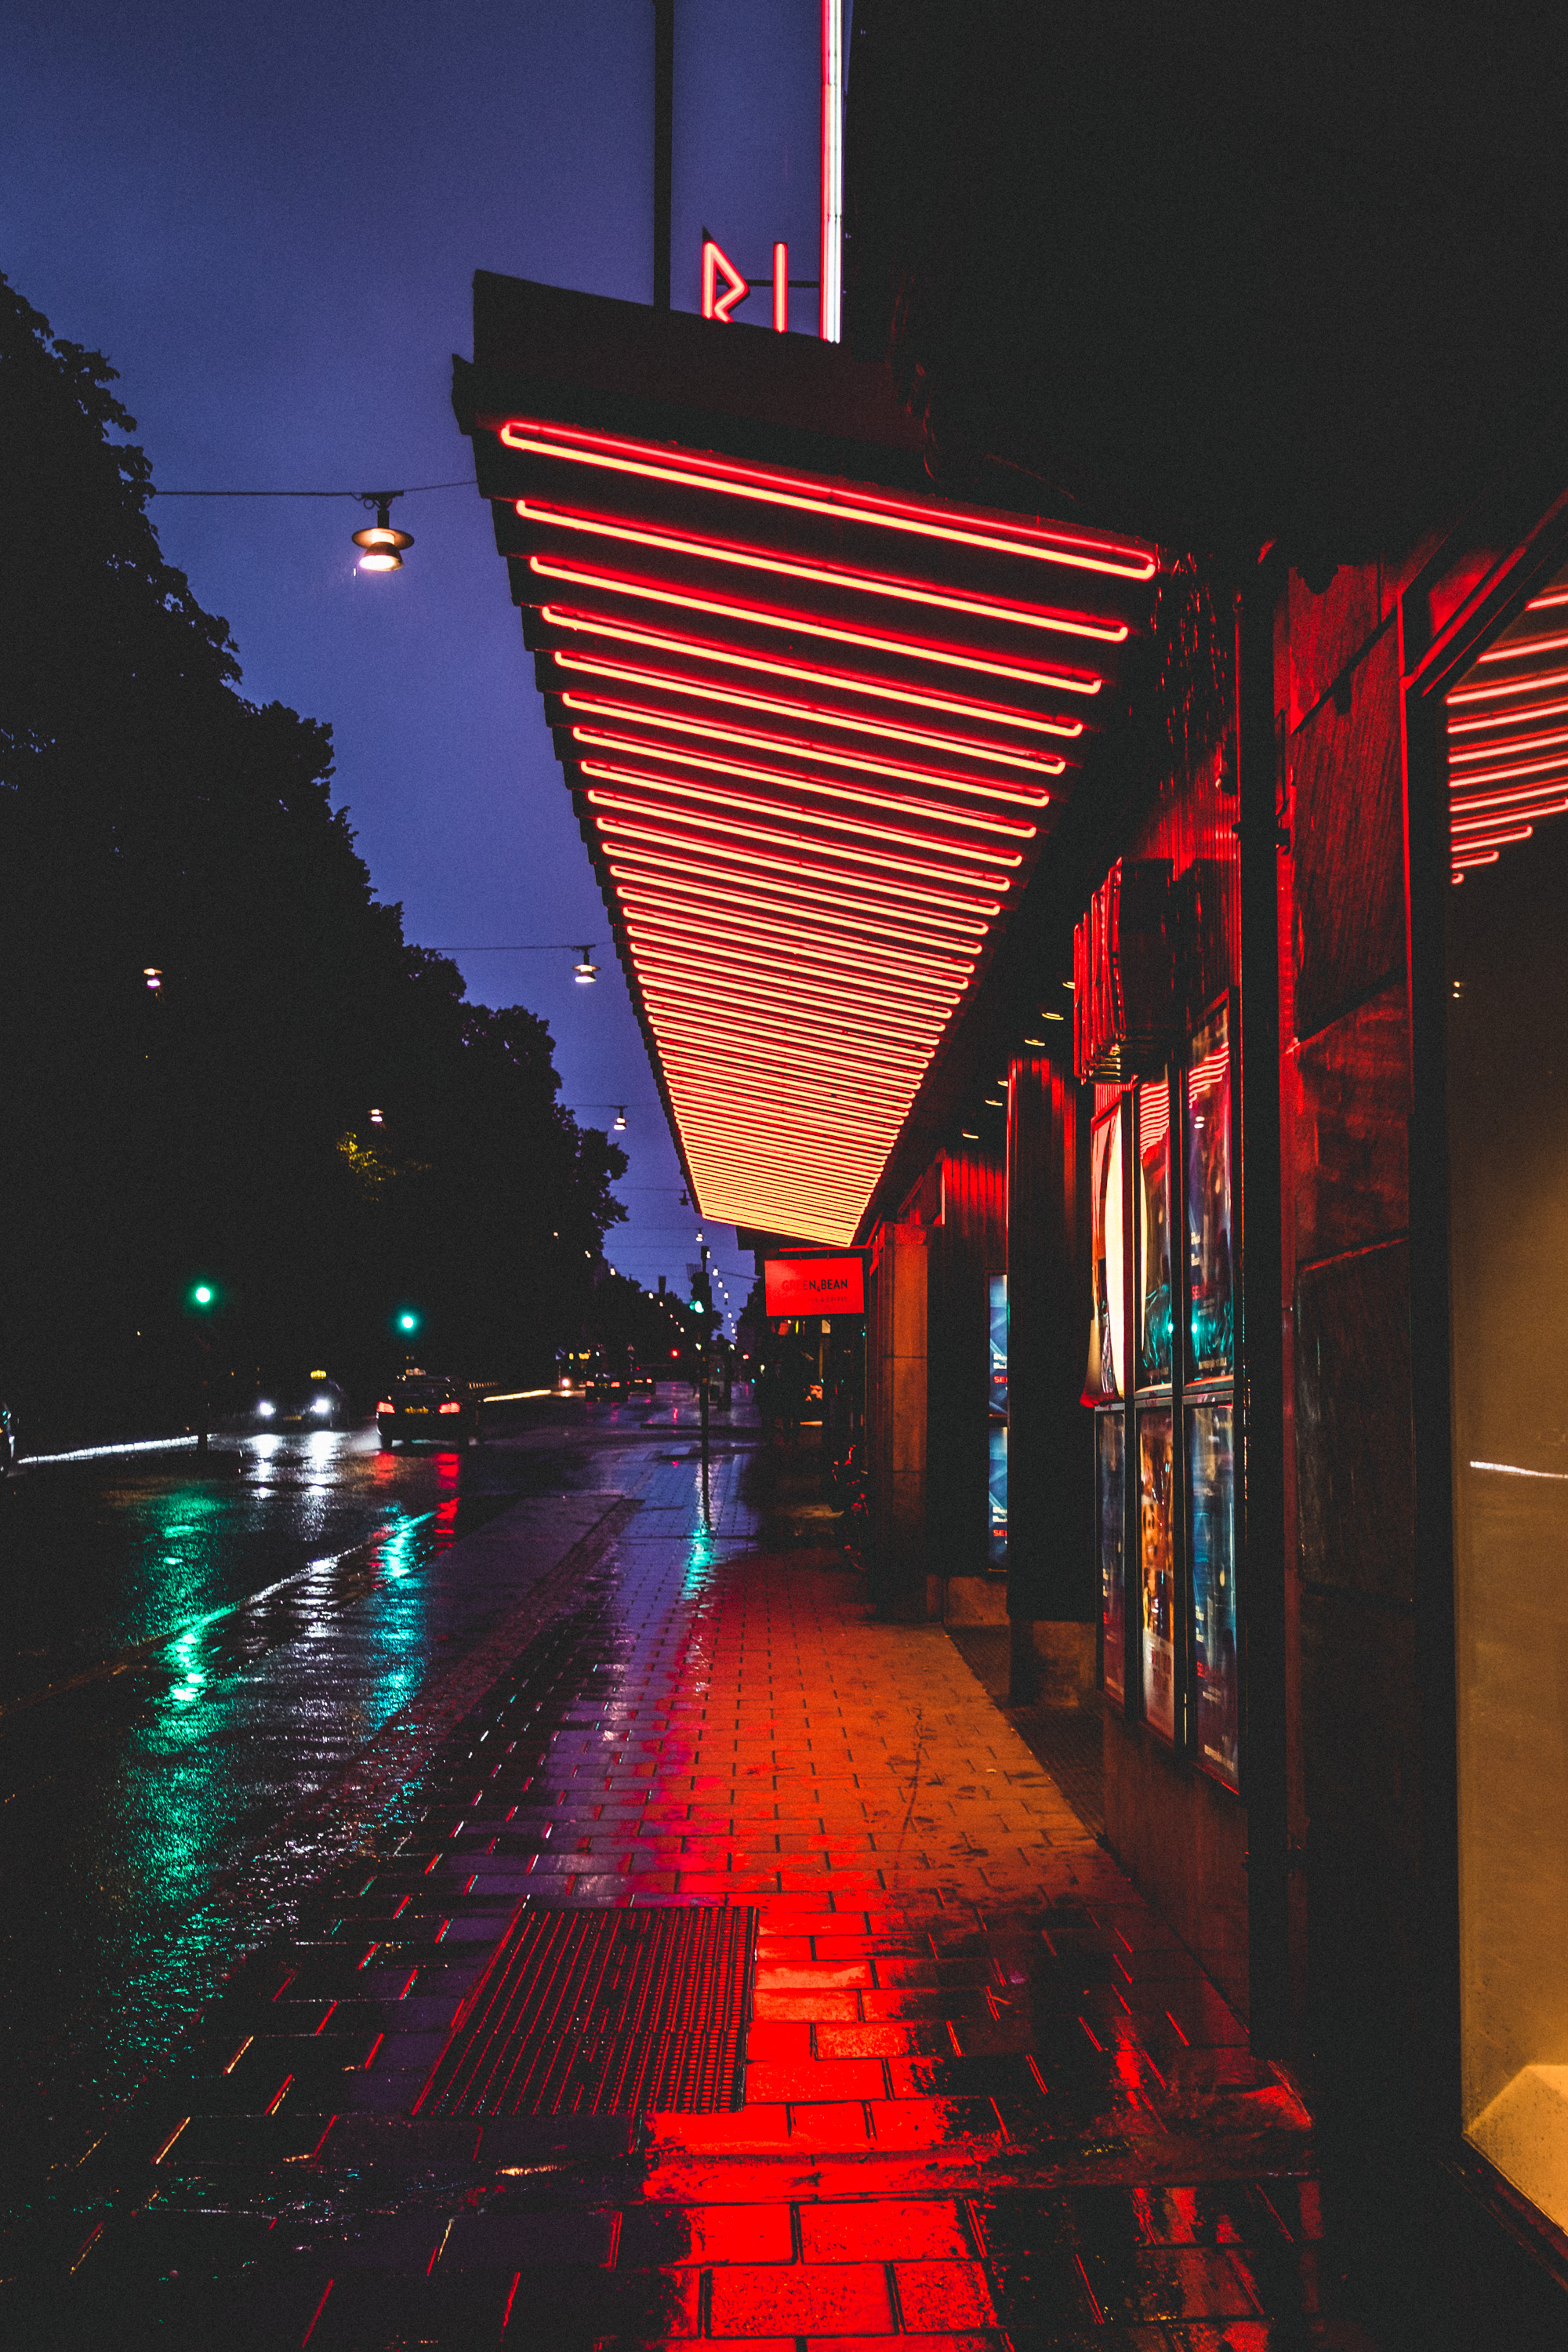 android cities, city lights, street, sweden, tile, road, night, building, stockholm